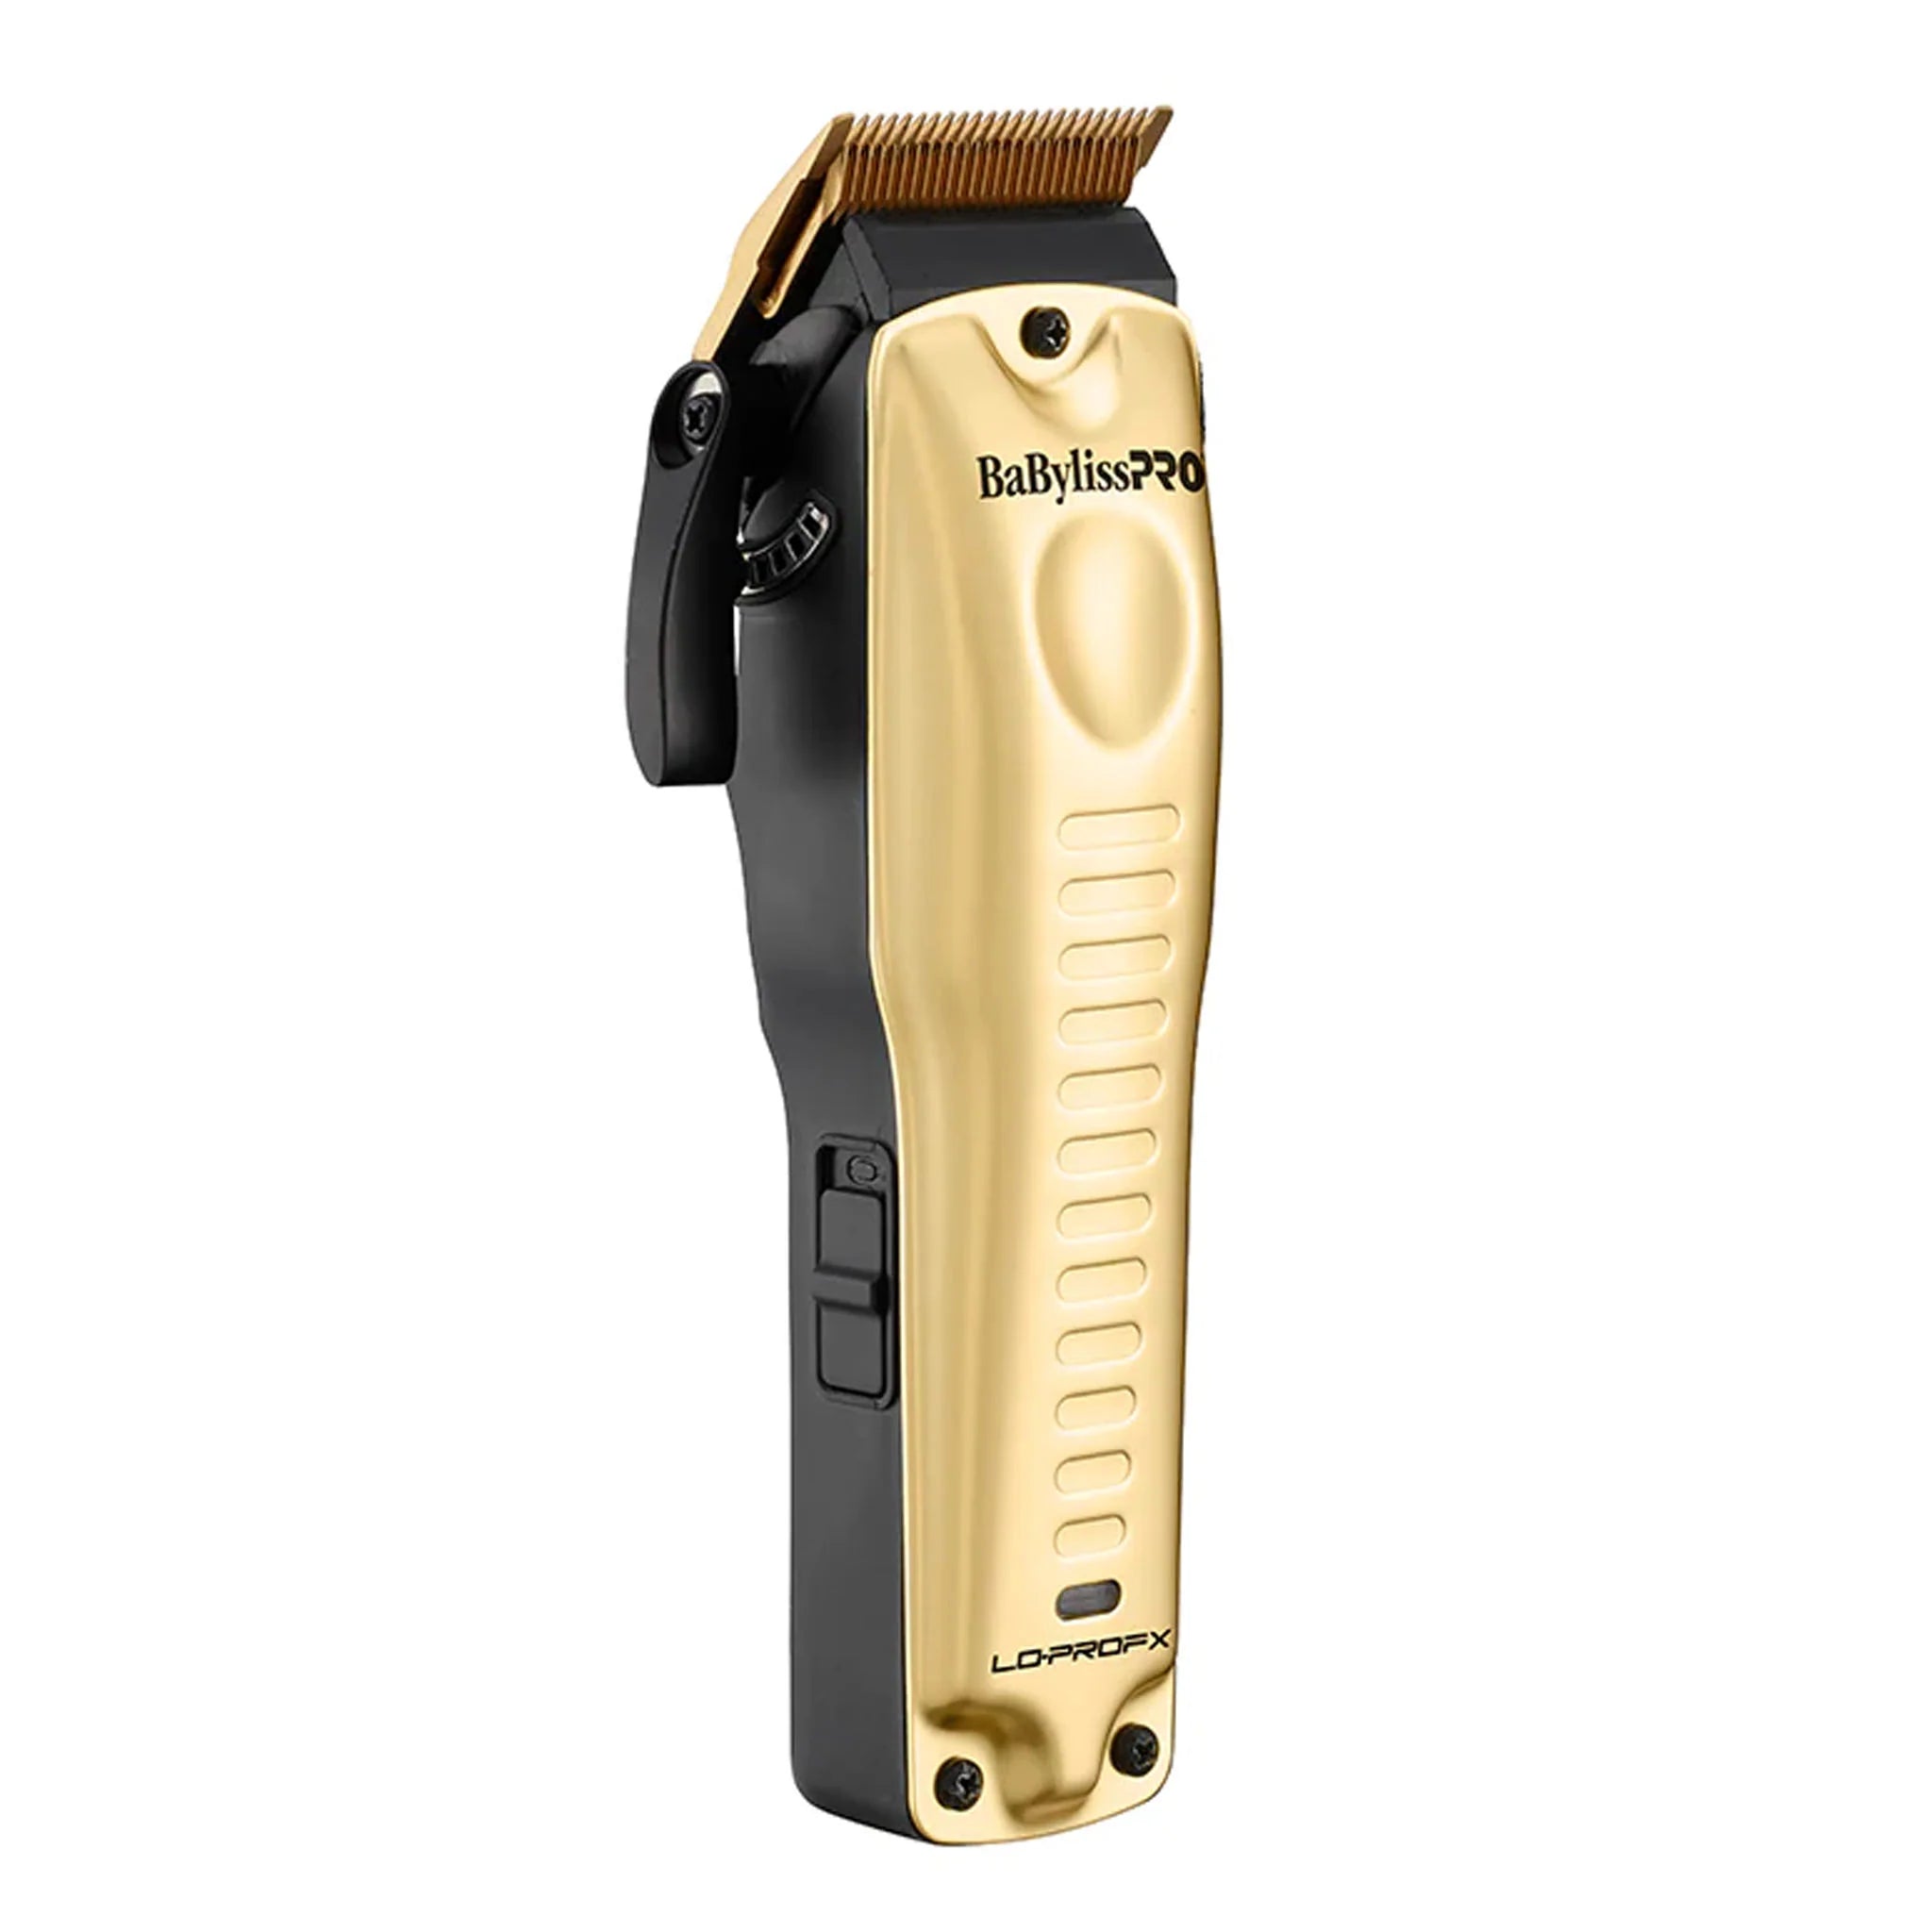 BabylissPRO LoPROFX Lithium Clipper Gold